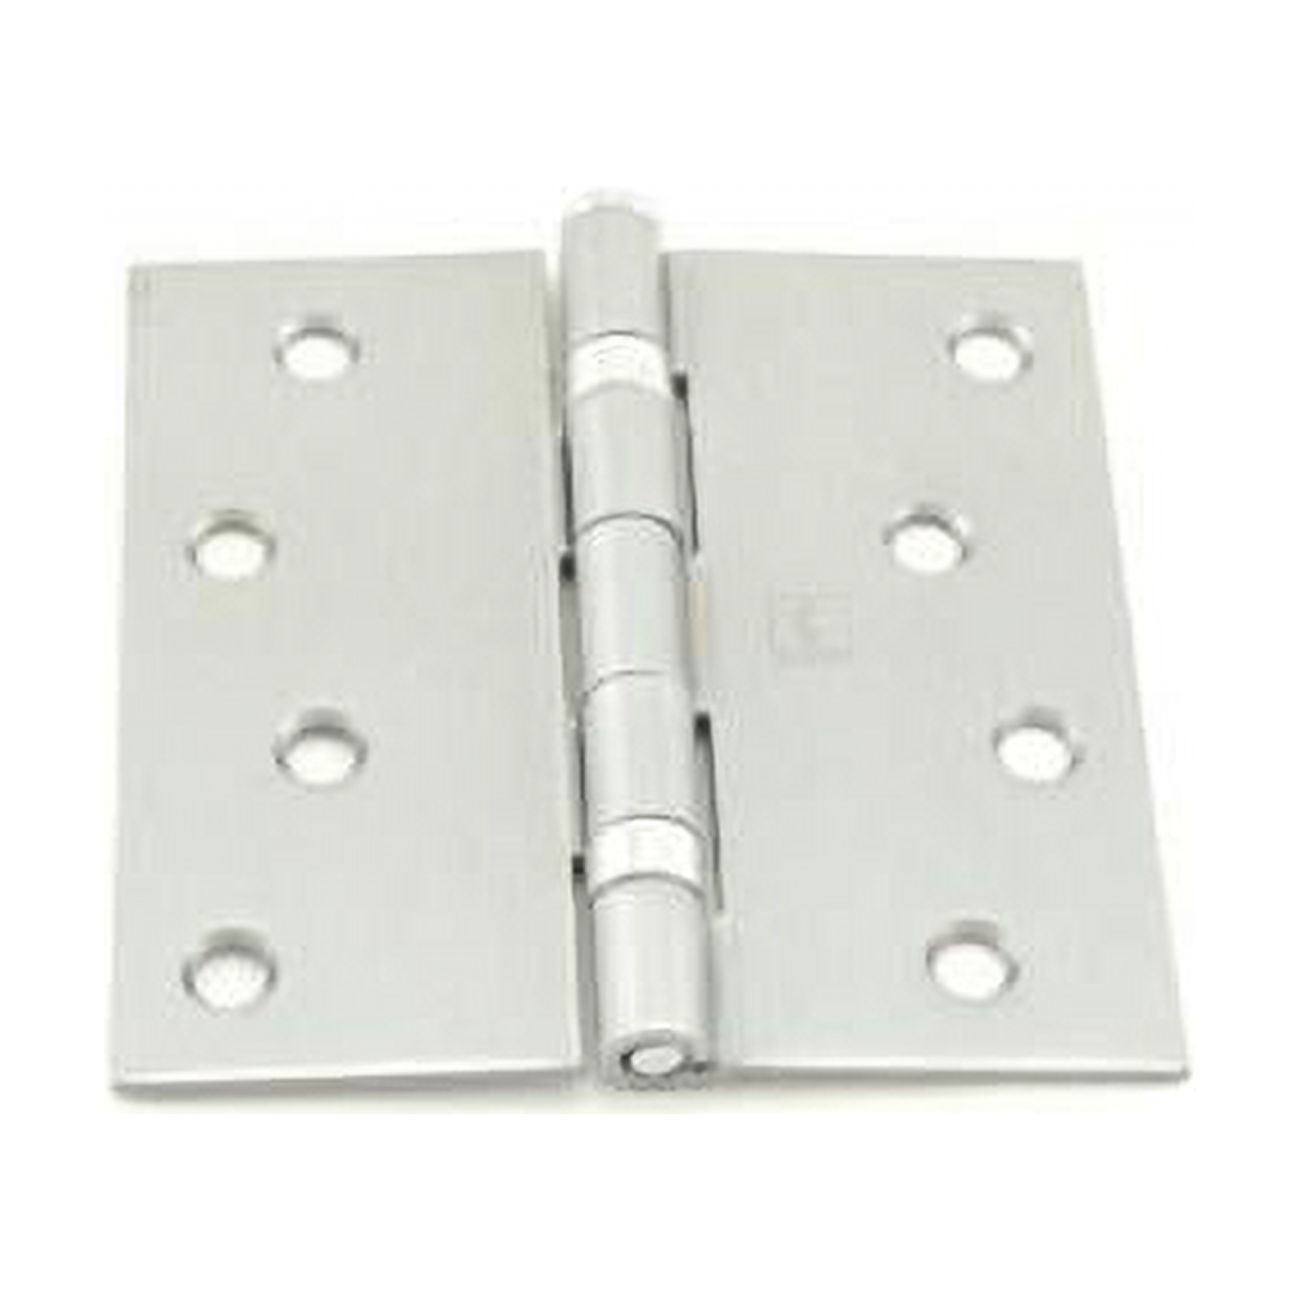 Hager  4 x 4 in. Square Corner Ball Bearing Full Mortise Residential Weight Hinge, No. 034482 Satin Chrome - image 1 of 1